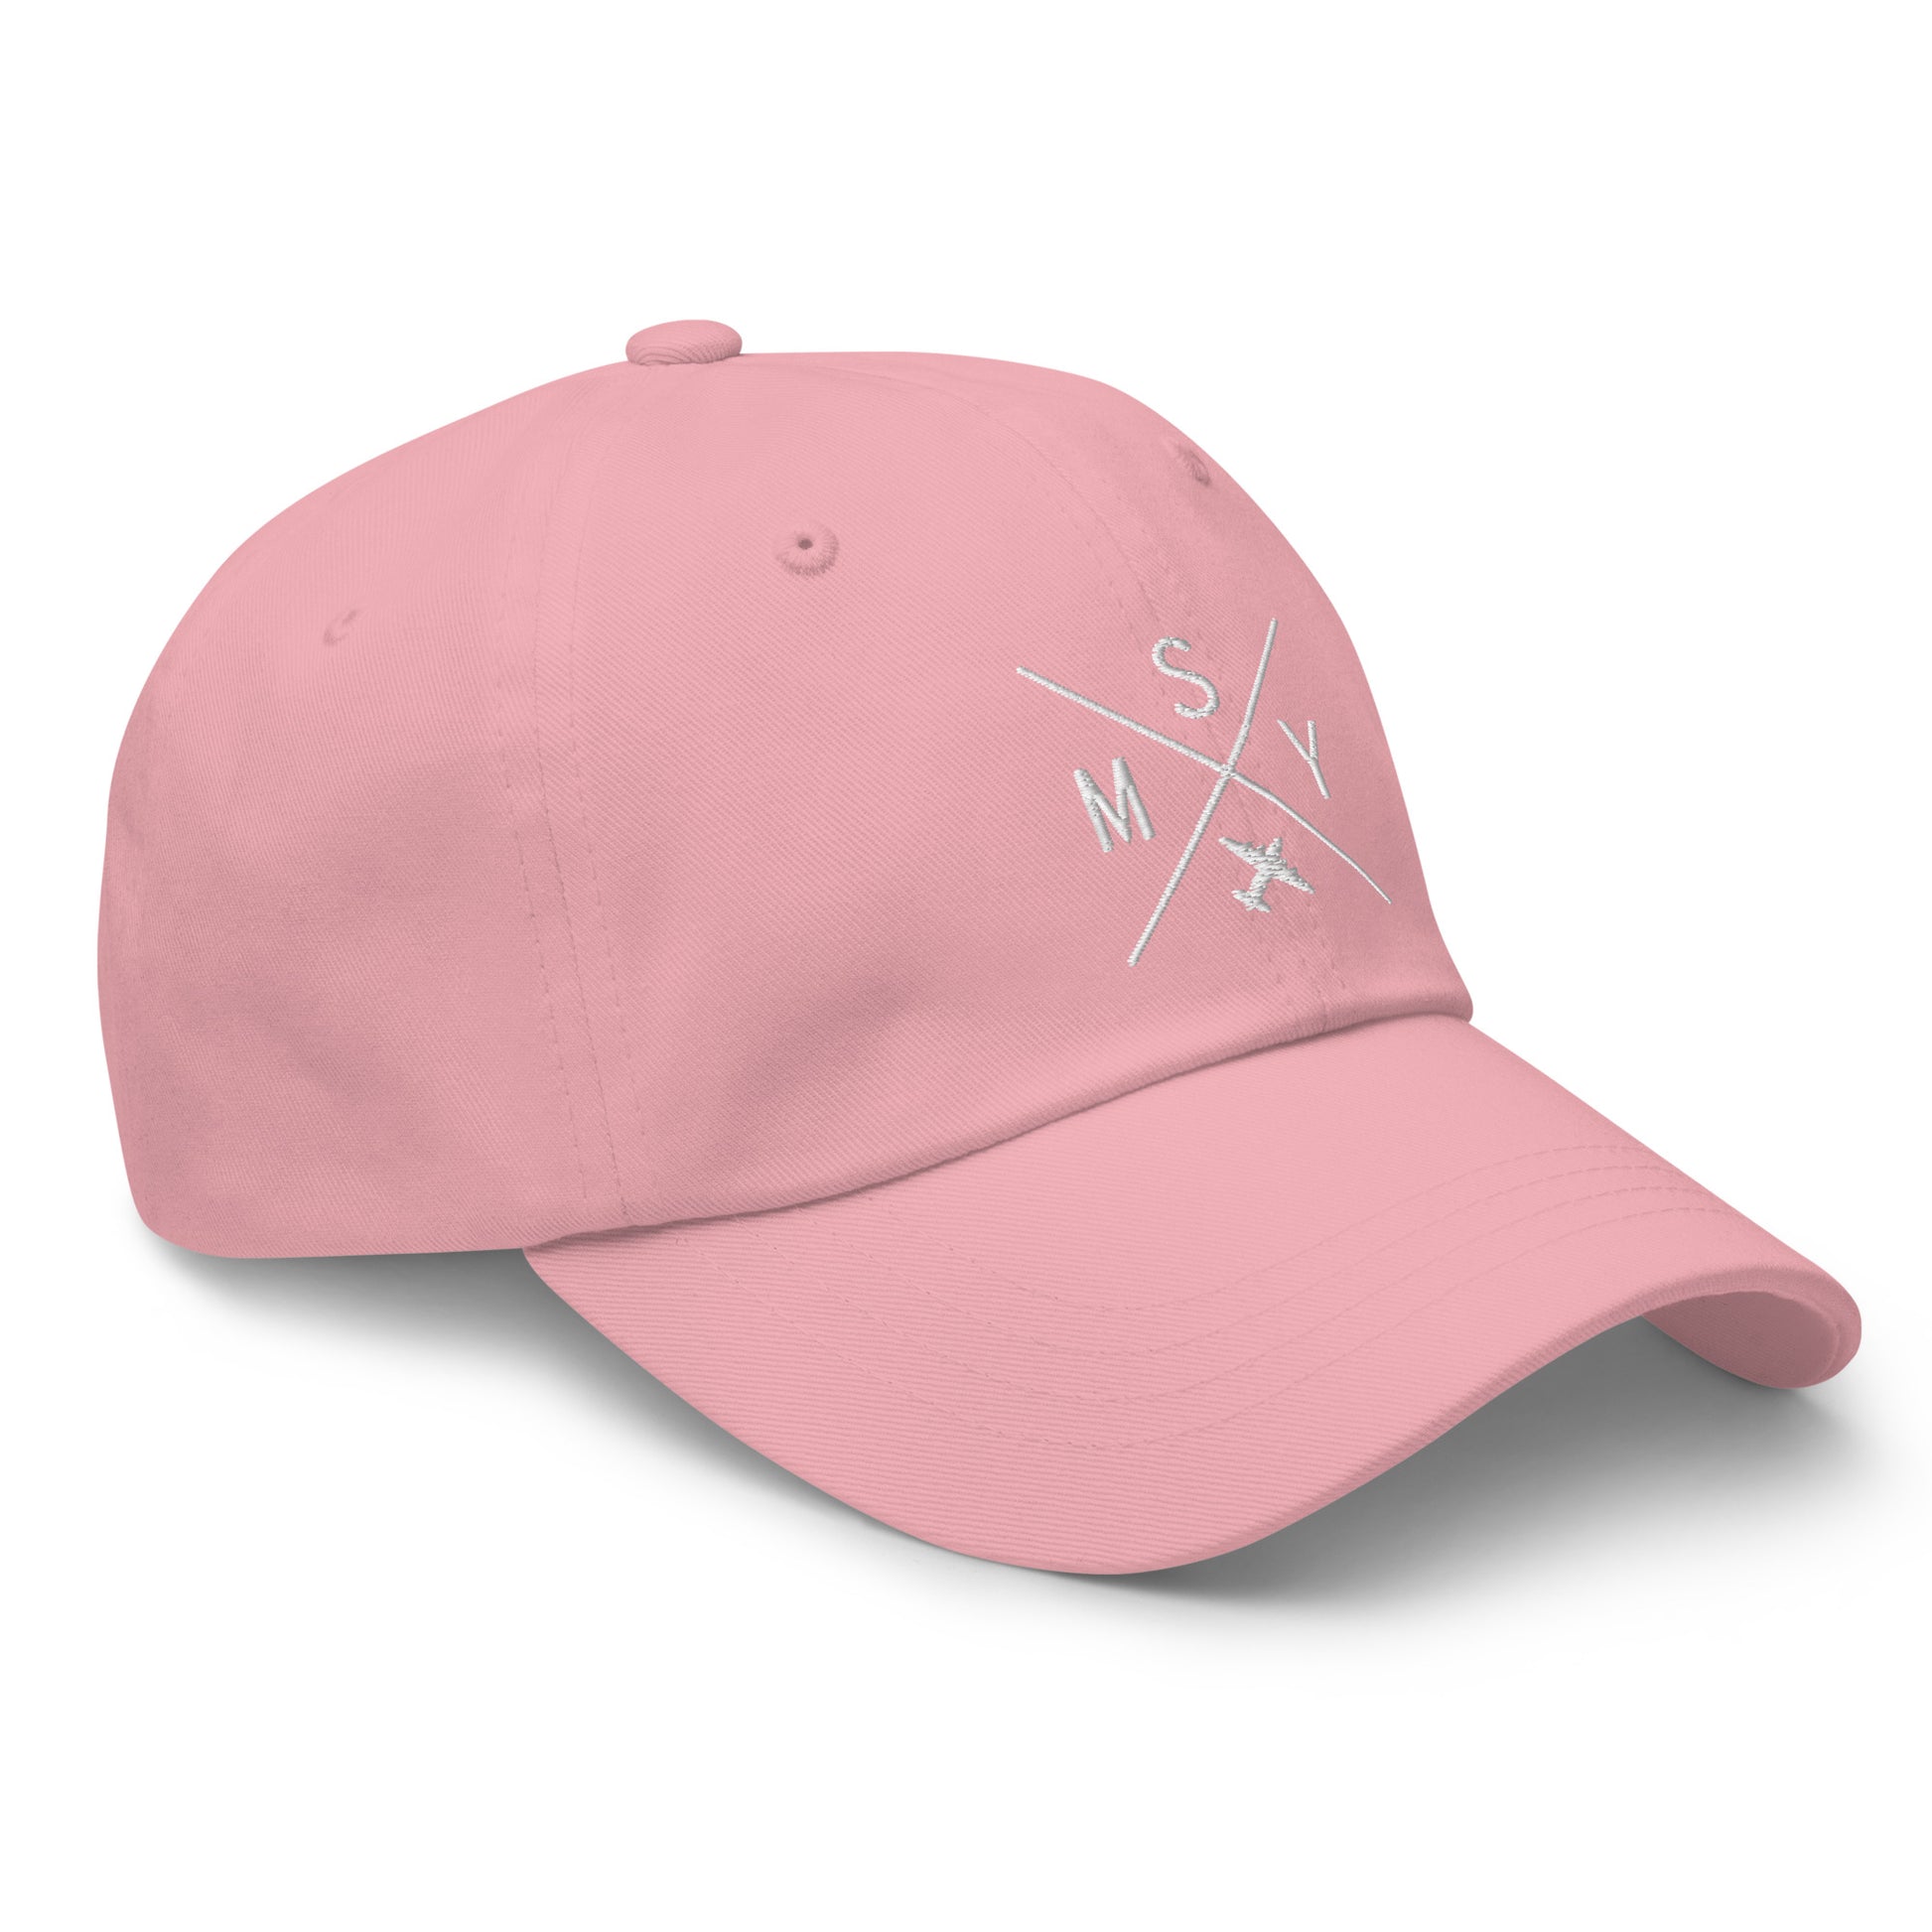 Crossed-X Dad Hat - White • MSY New Orleans • YHM Designs - Image 26